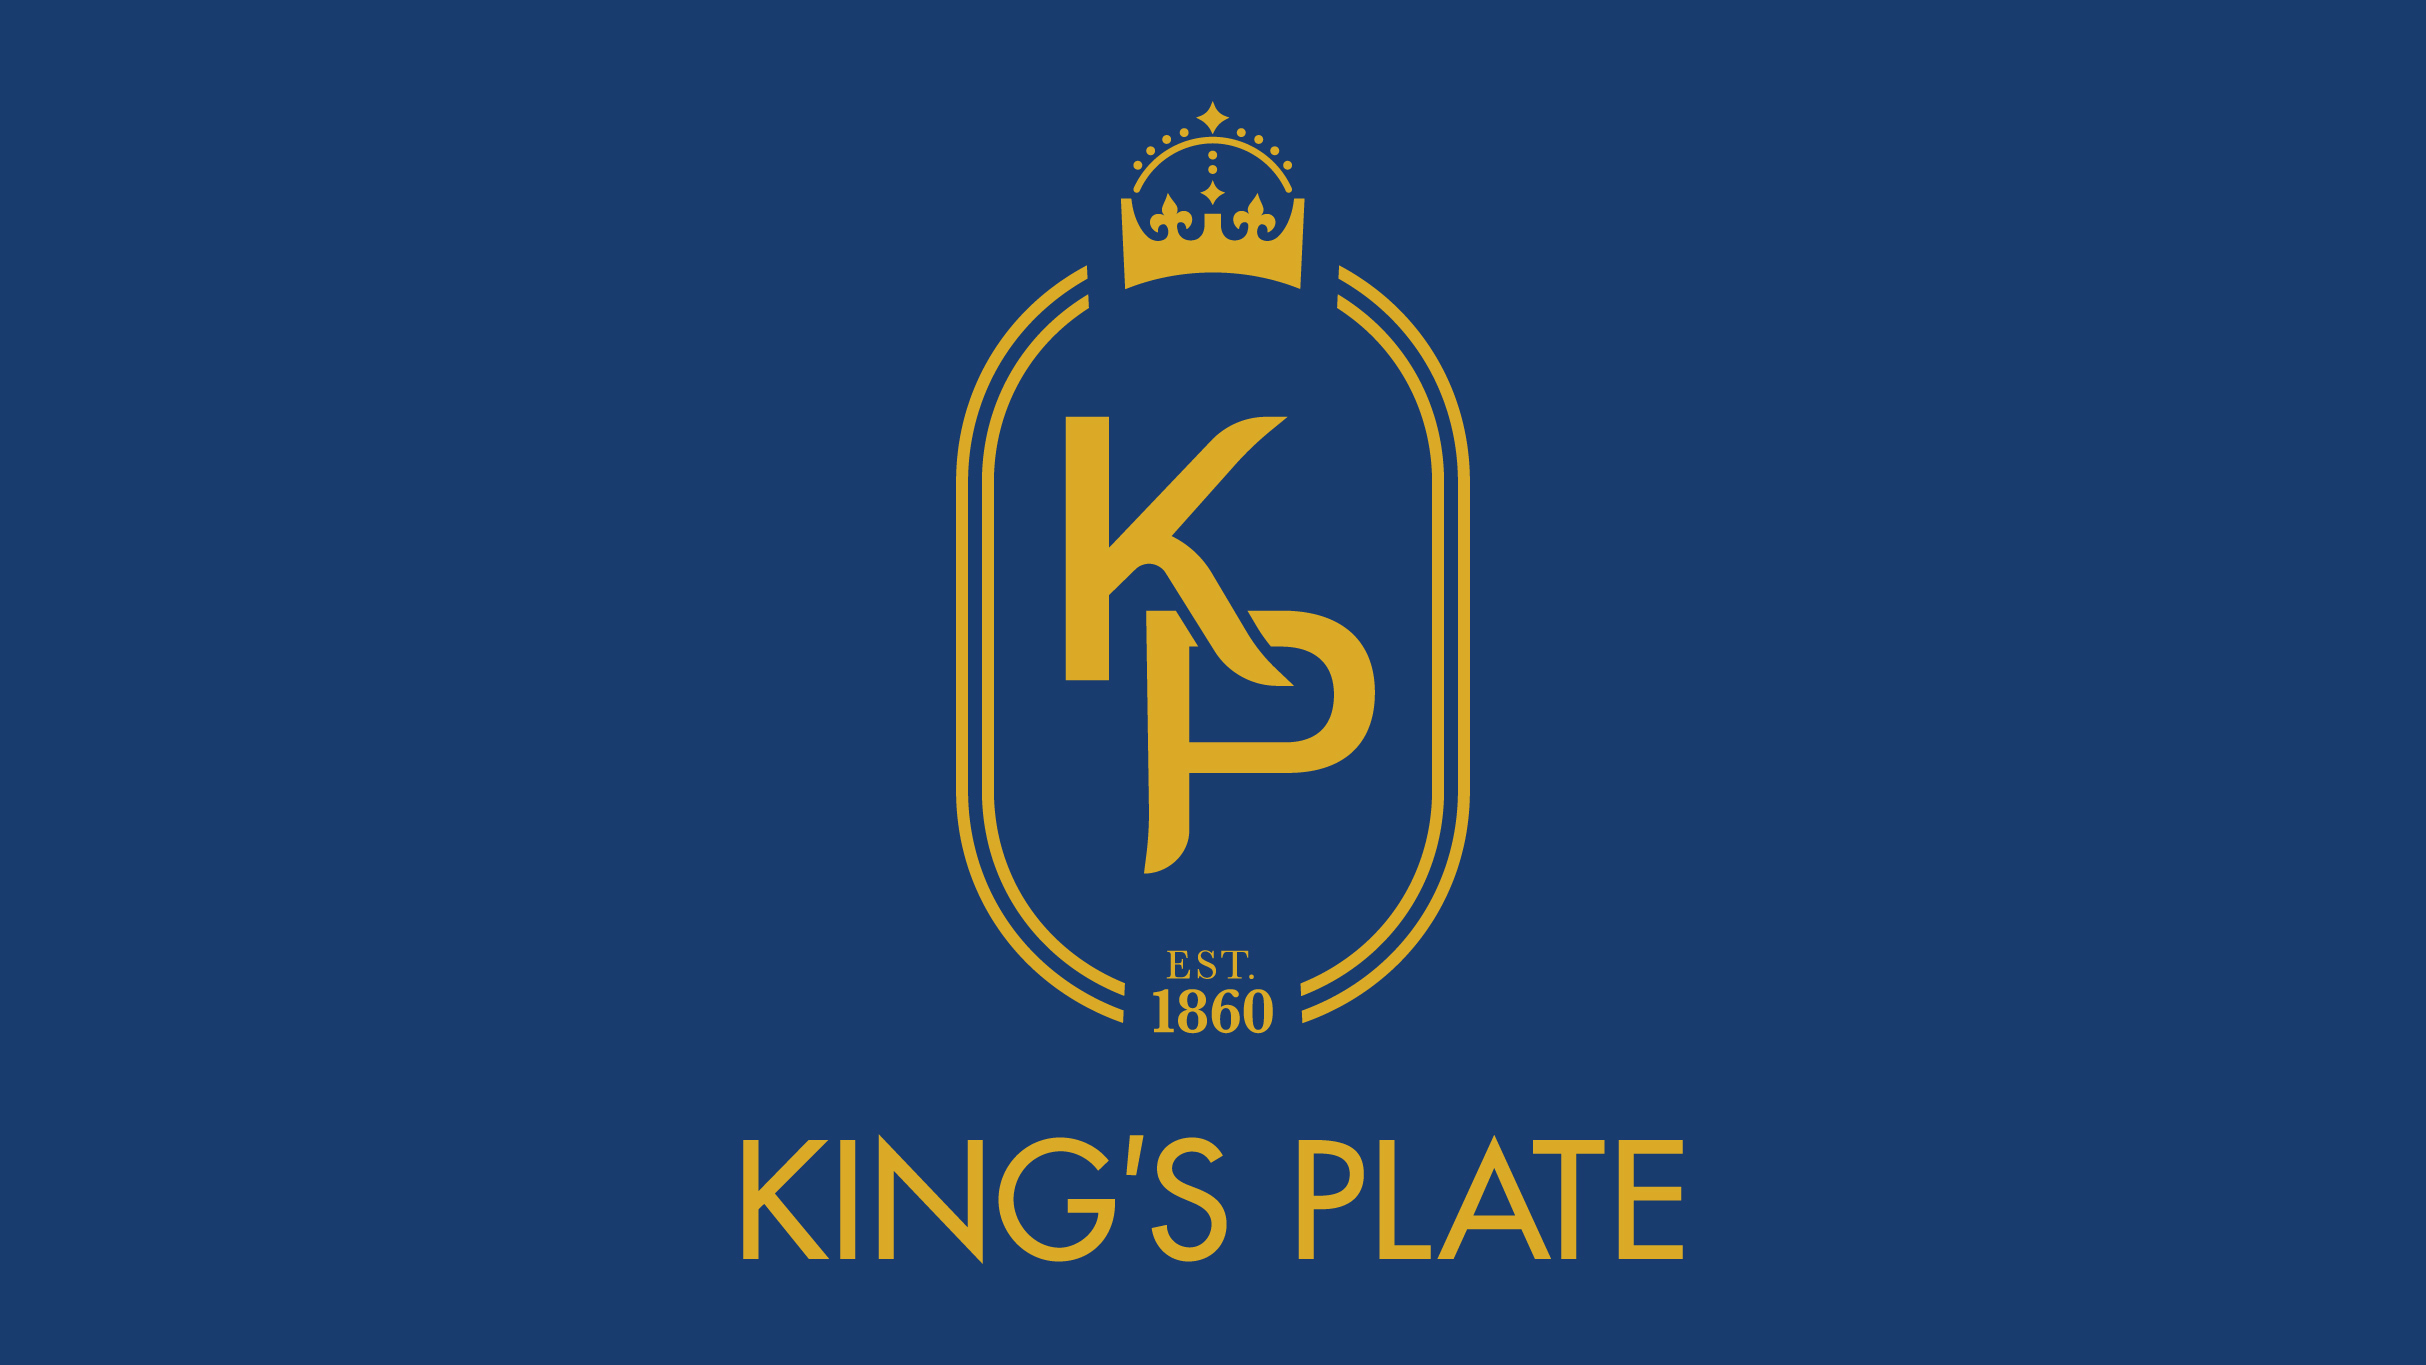 164th King's Plate at Woodbine Racetrack in Toronto promo photo for Derby Day Woodbine Attendees Onsale presale offer code